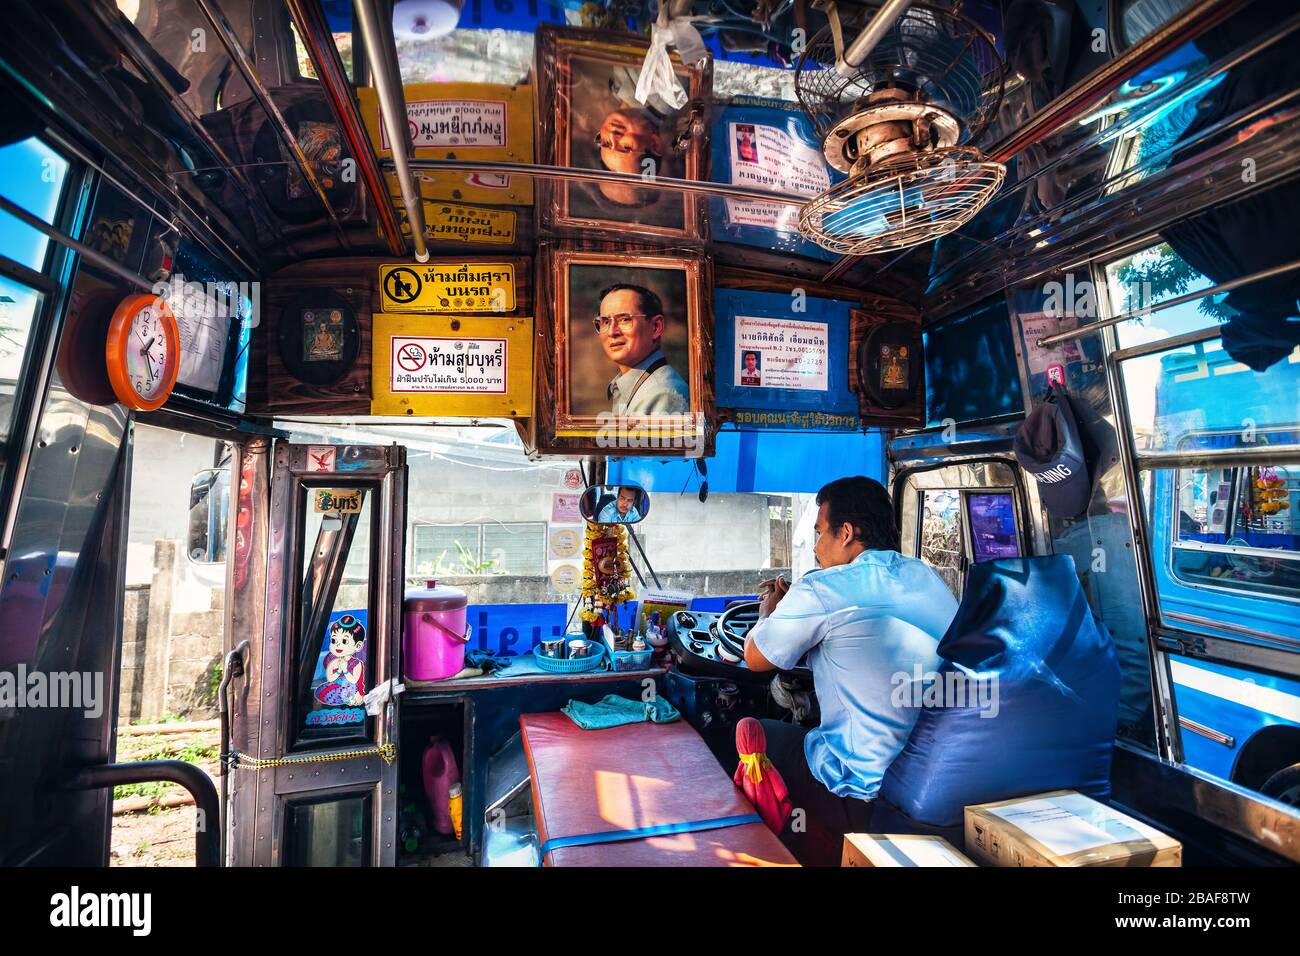 CHIANG RAI, Thailand - November 26, 2016: Cabin of public bus with portrait of King and driver waiting of departure at the station terminal Stock Photo